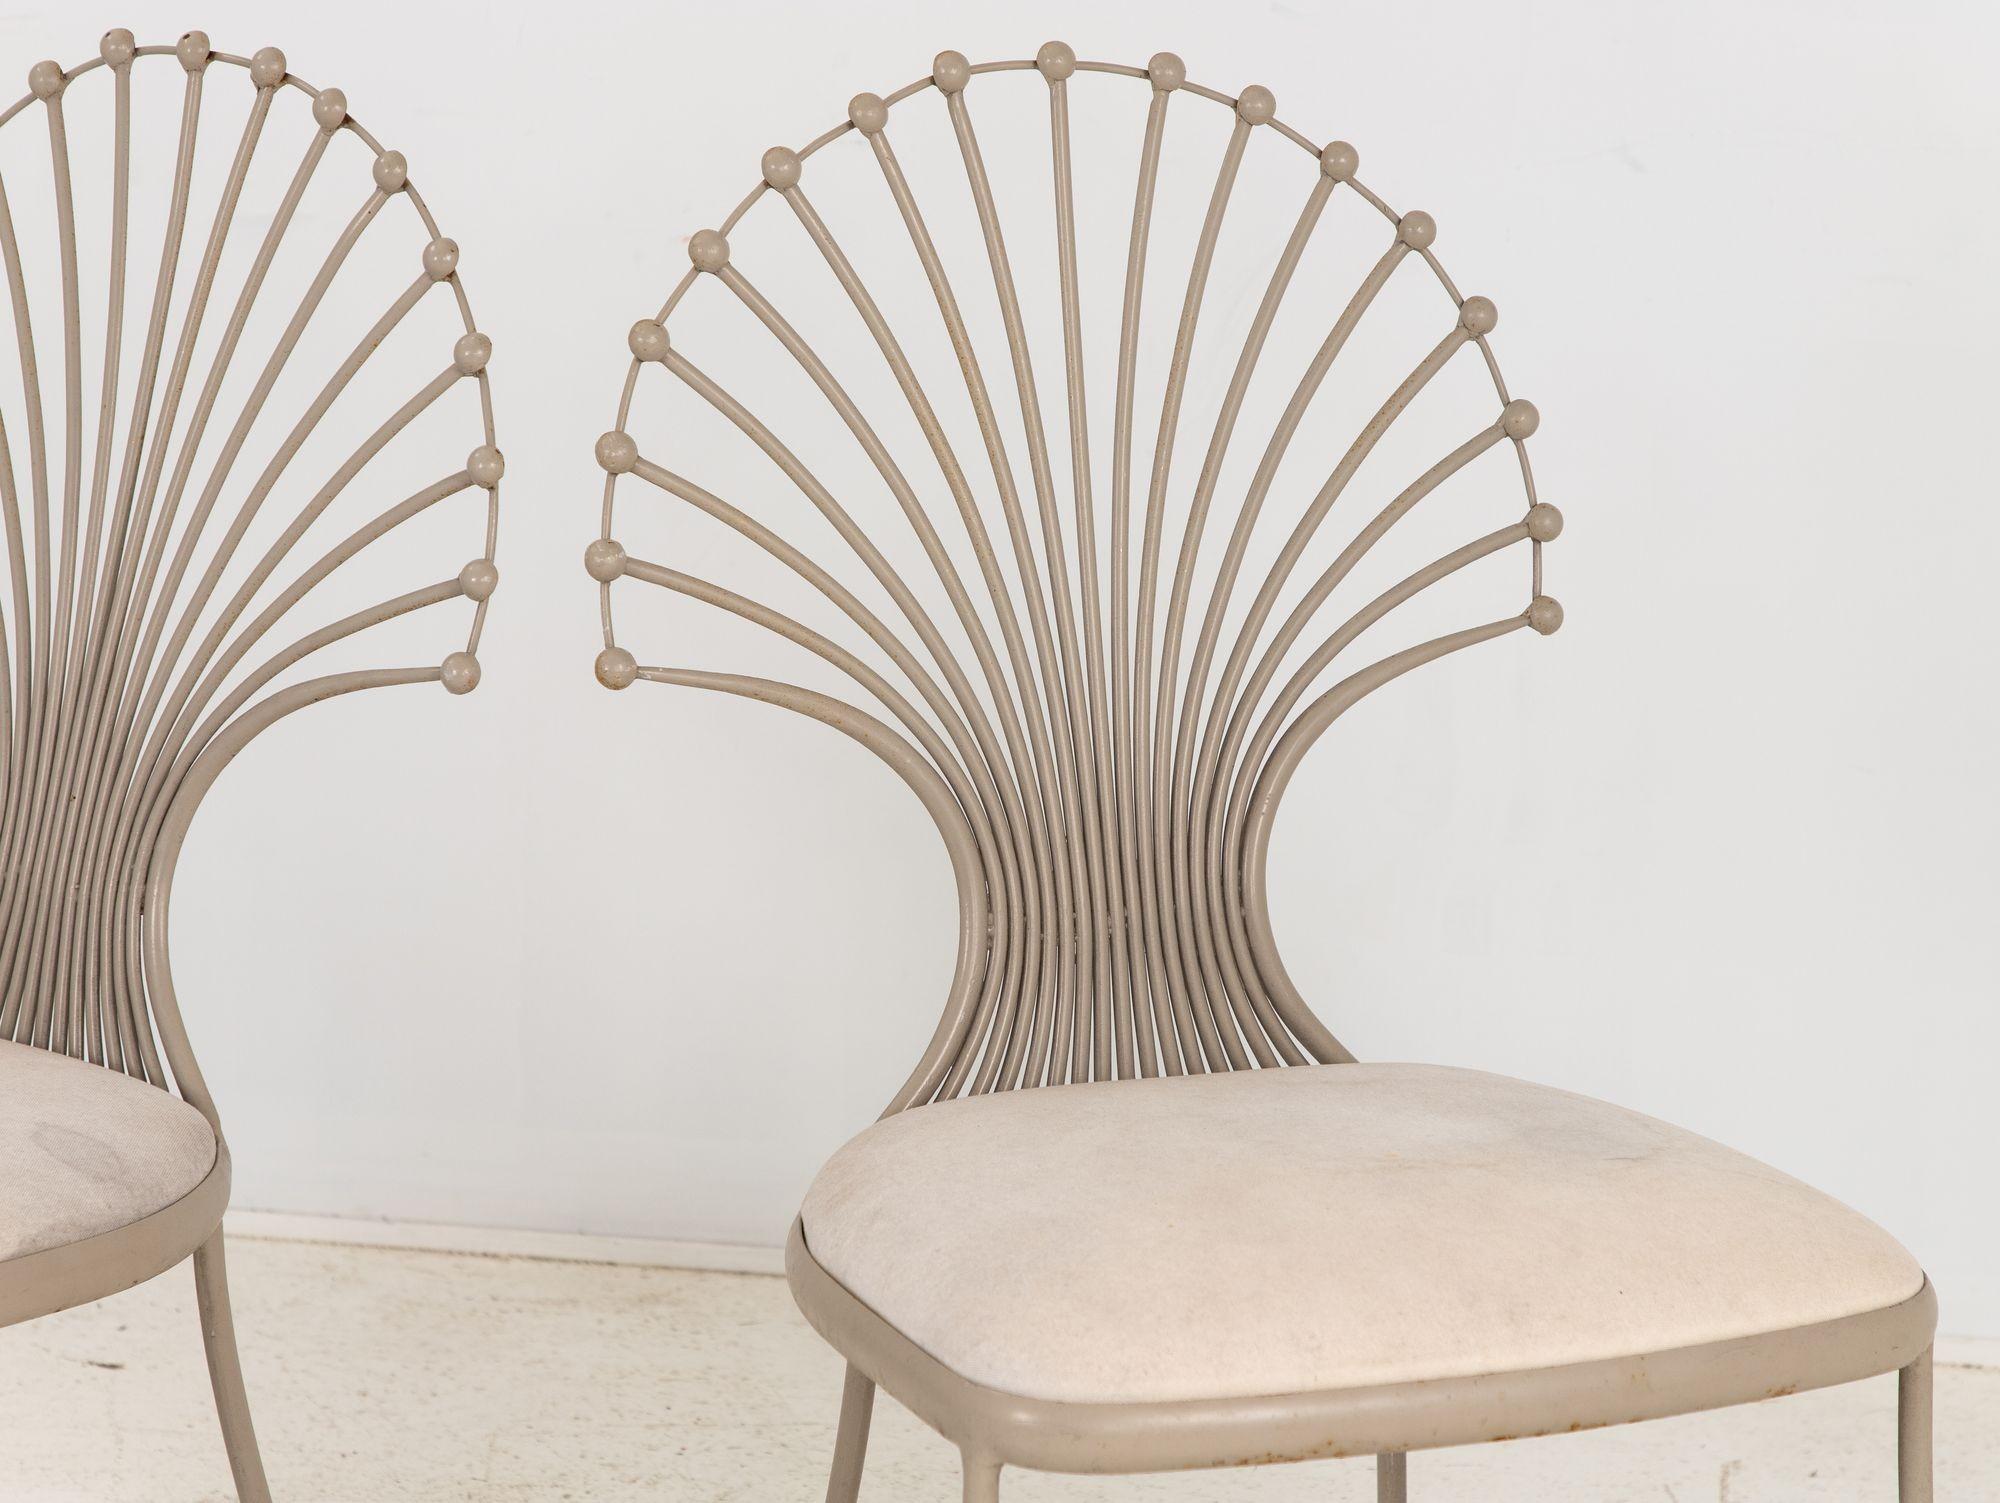 Late 20th Century Pair Side Chairs with Peacock or Wheat Sheaf Motif, Gray Painted Aluminum